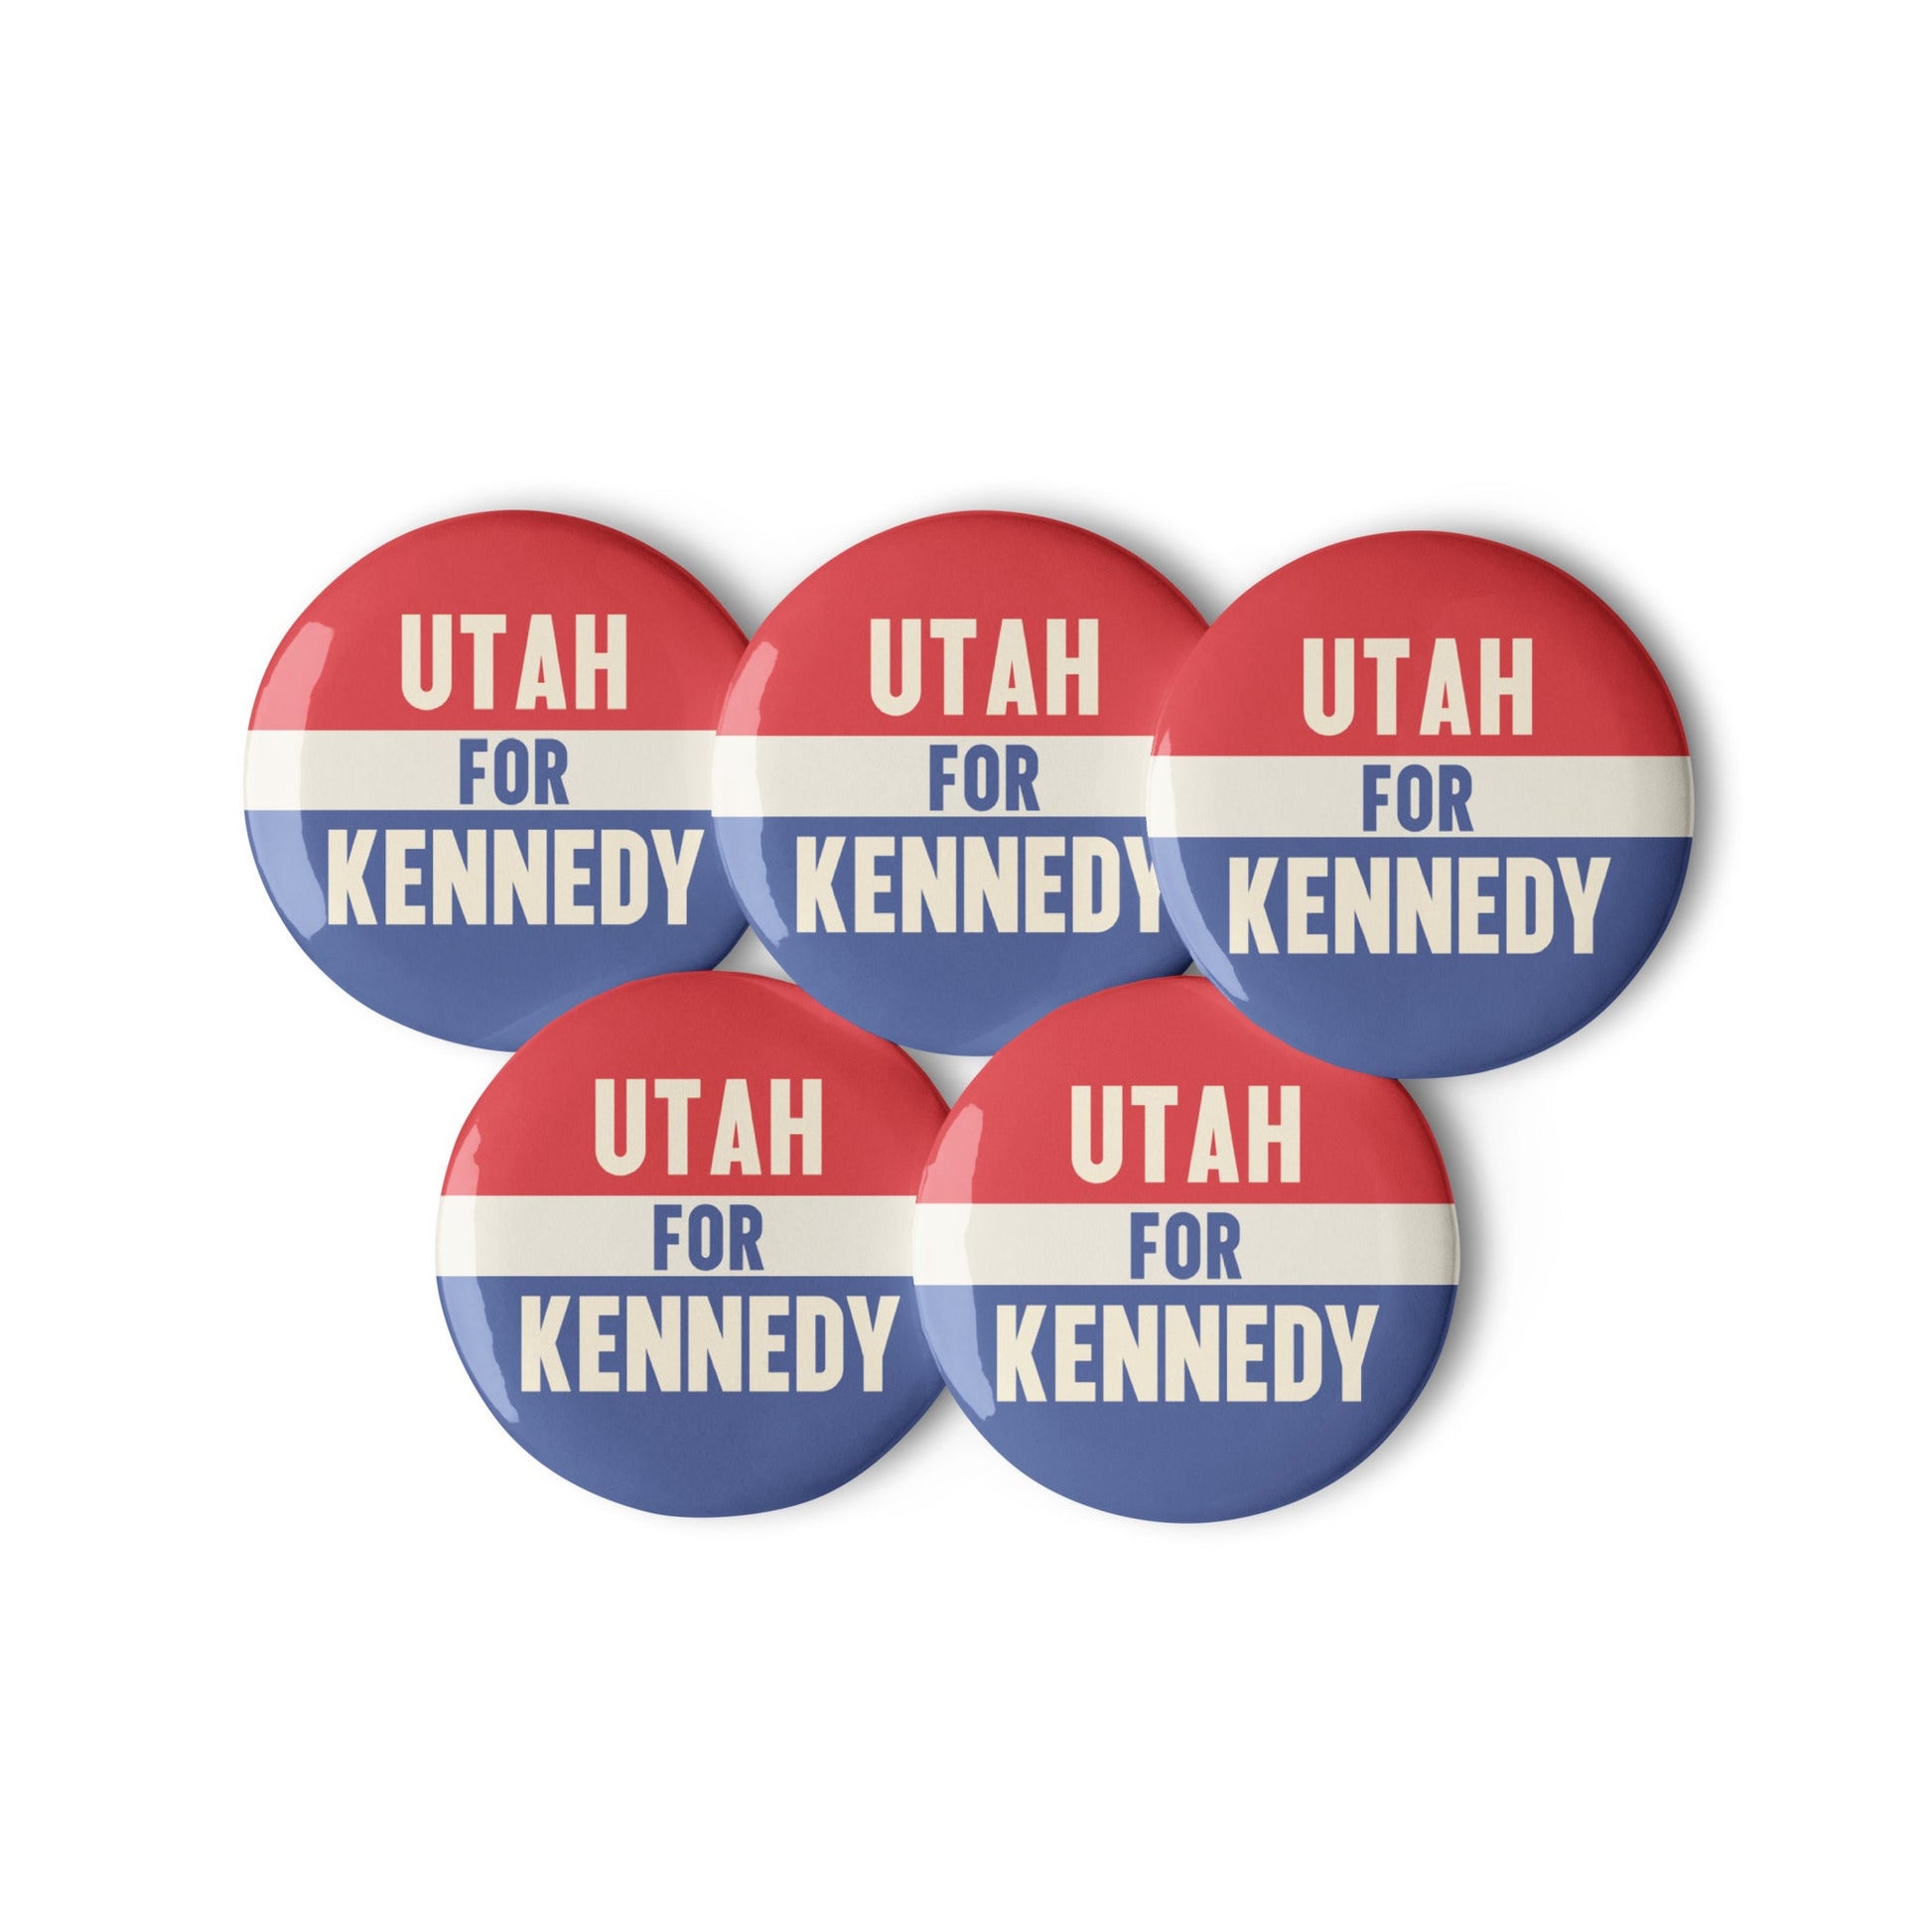 Utah for Kennedy (5 Buttons) - TEAM KENNEDY. All rights reserved